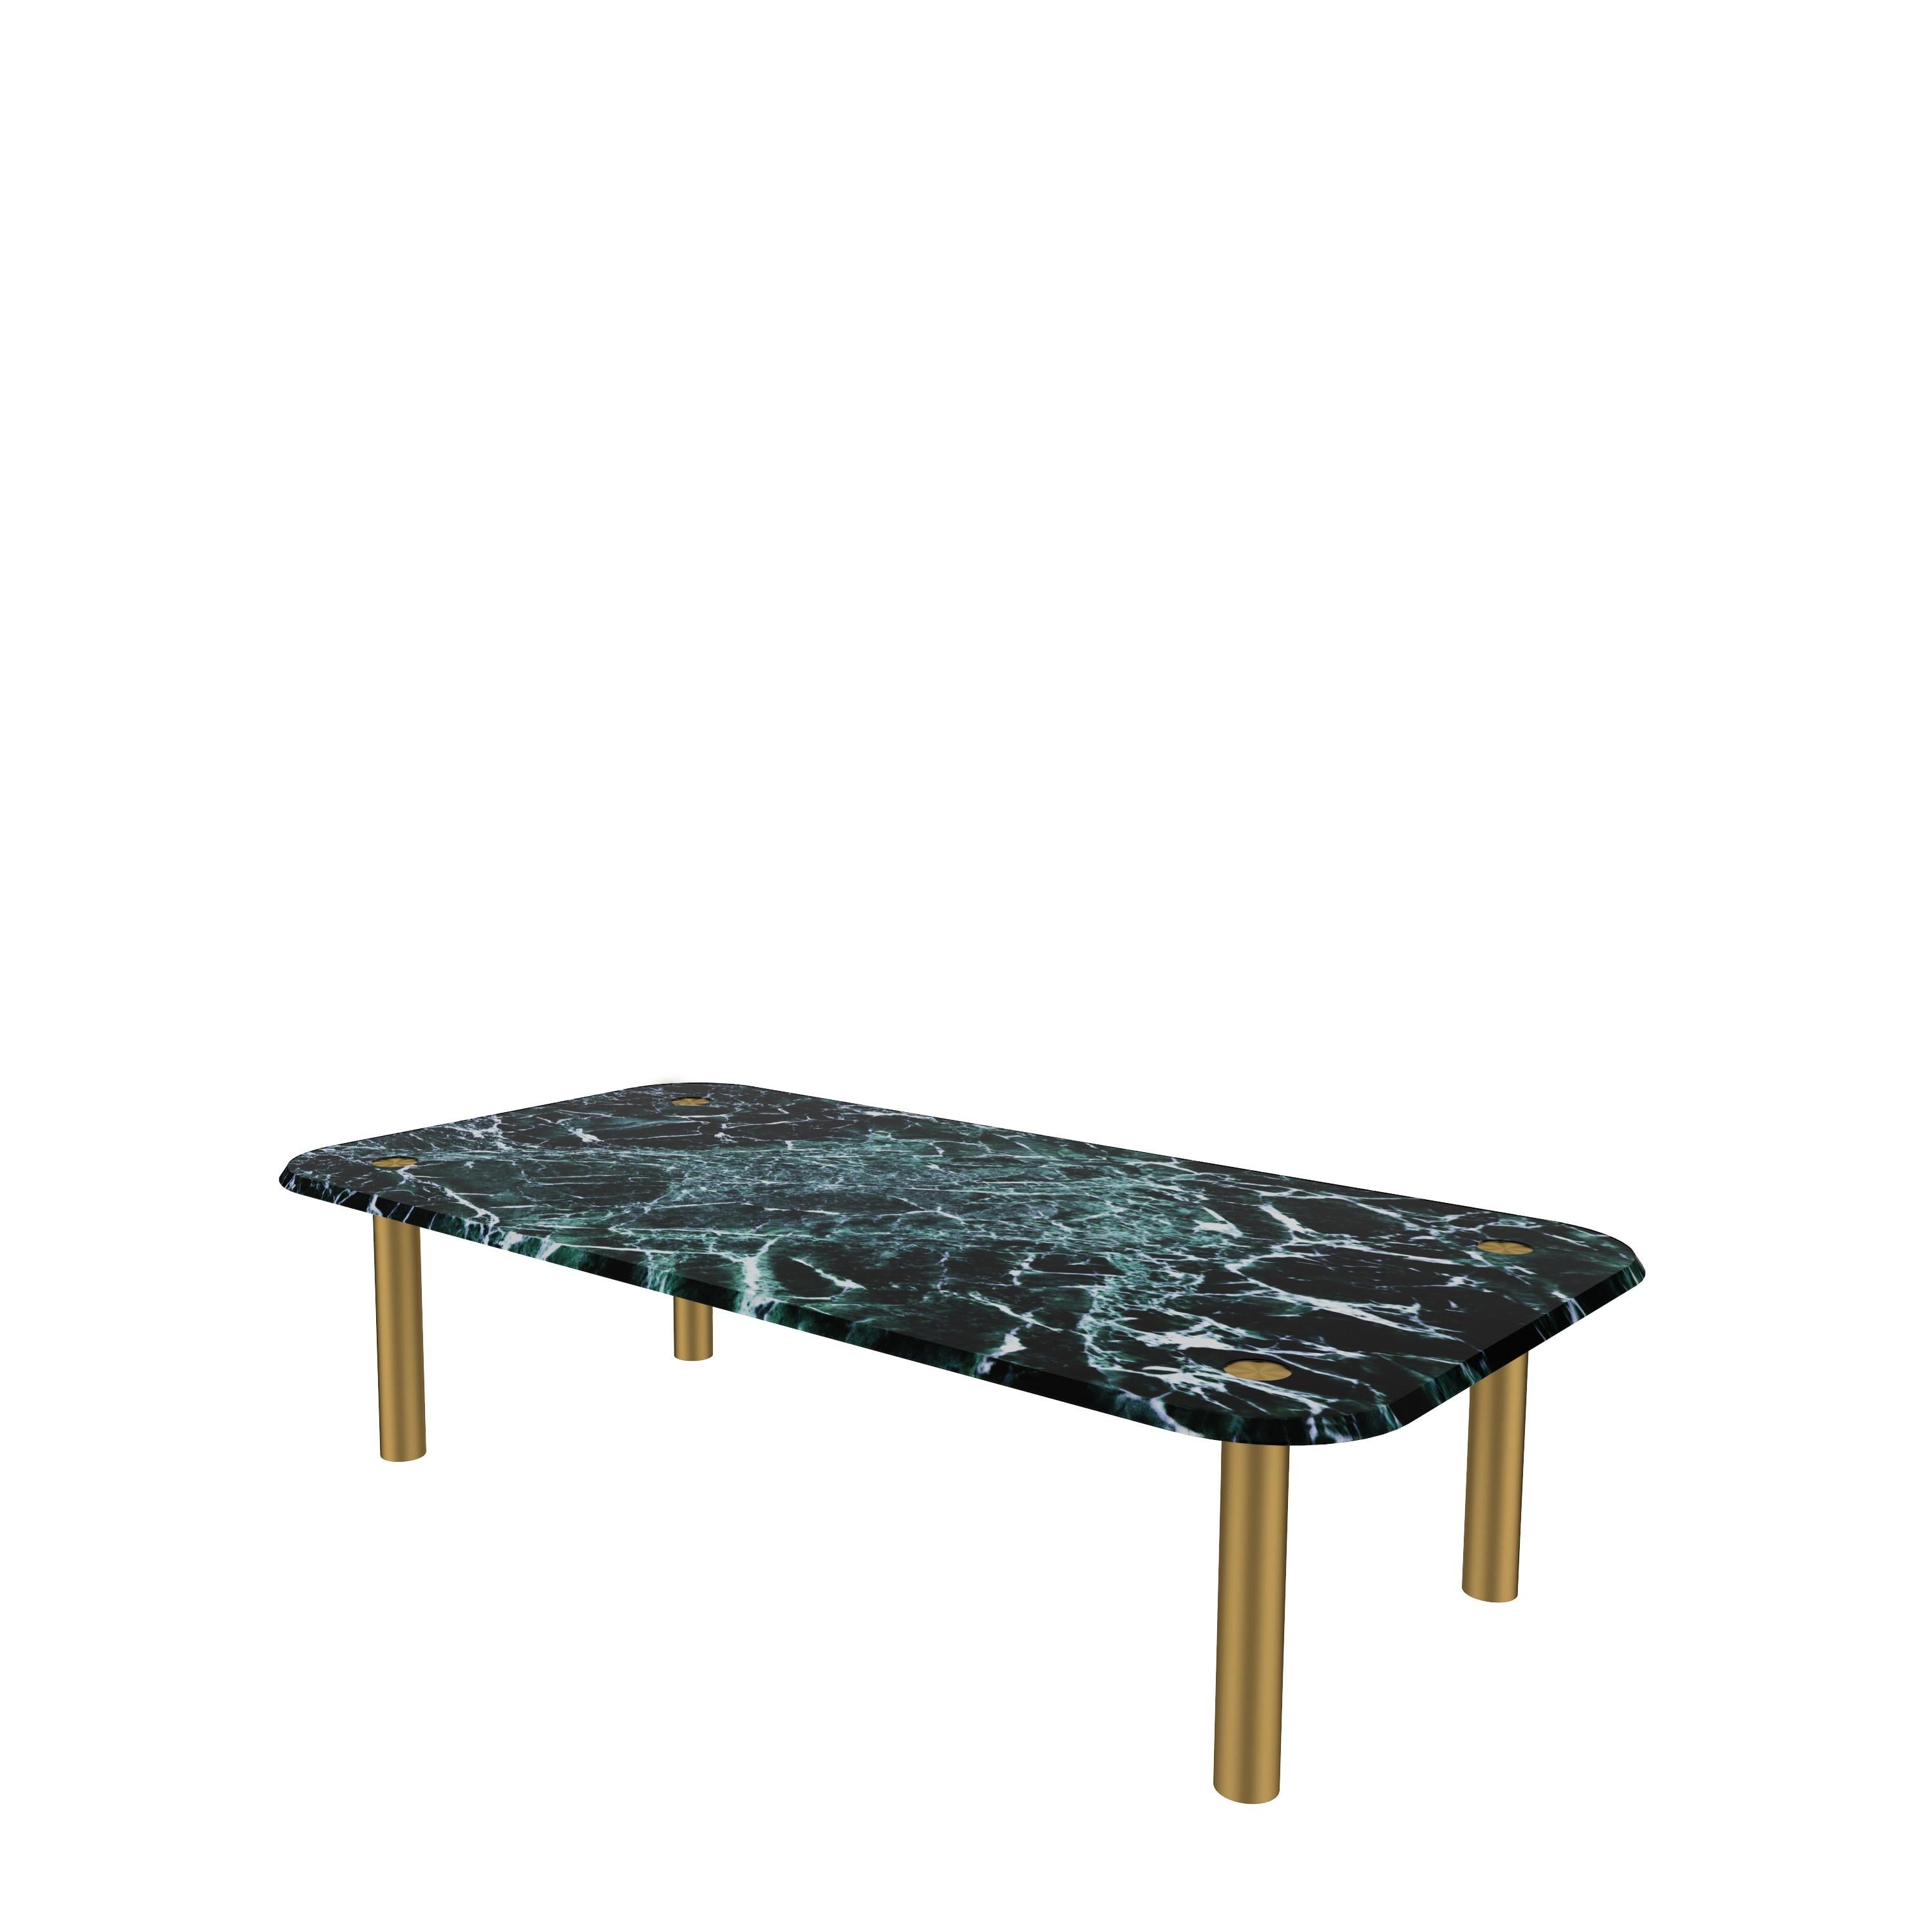 𝗣𝗿𝗼𝗱𝘂𝗰𝘁 𝗗𝗲𝘁𝗮𝗶𝗹𝘀:
Steady rectangular coffee table with frame going through the marble tabletop to expose the nicely done metalwork on the surface. The different heights of the smaller tables in this collection make them possible to